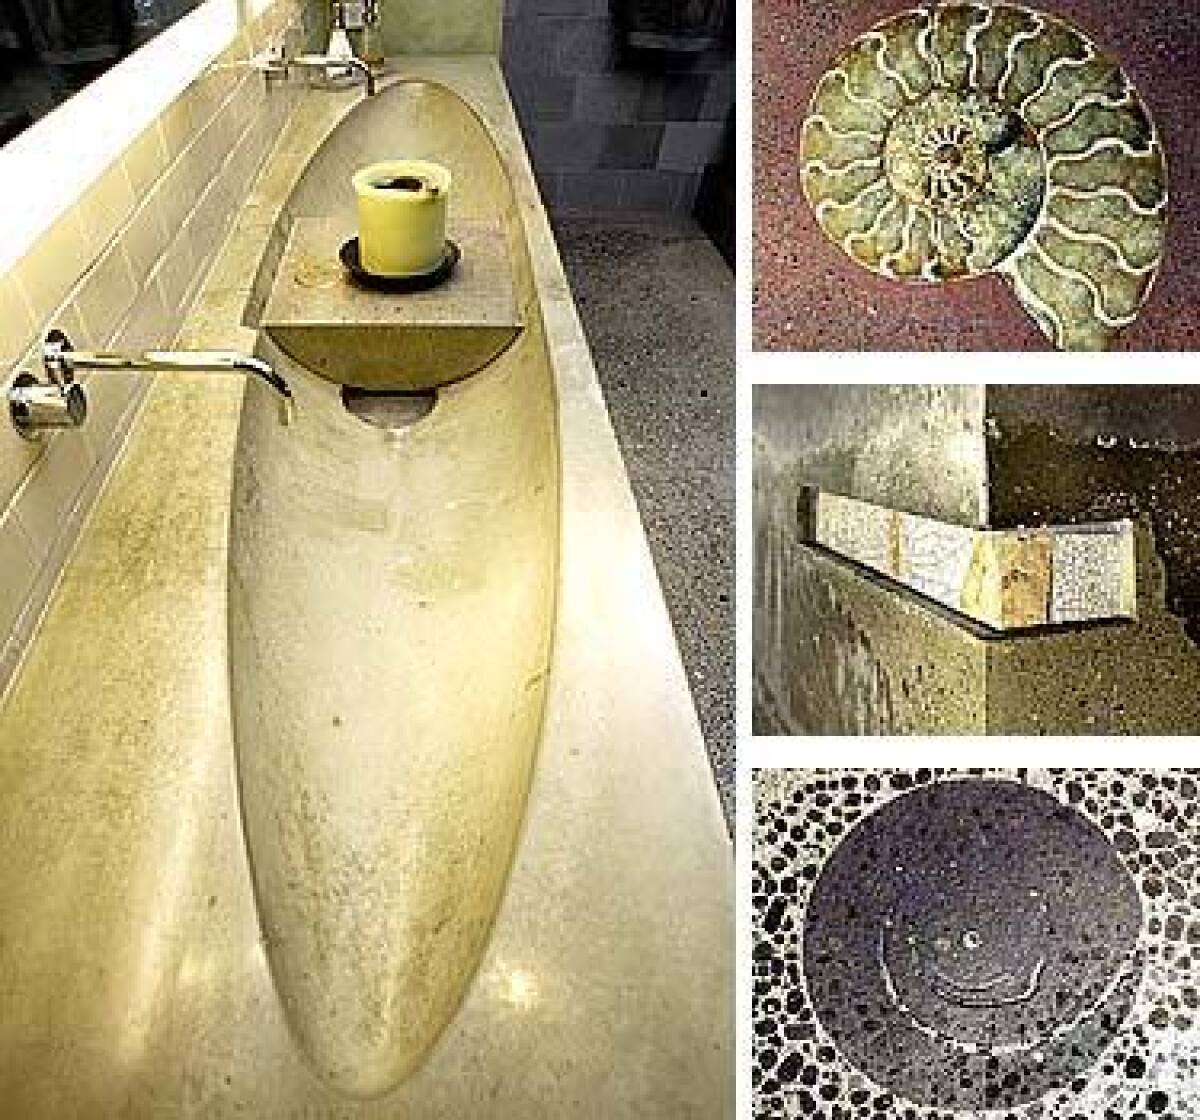 Fu-Tung Cheng accents his projects with such features as inlaid ammonite or other fossils, top; sculptural cutouts and insets, center; and infinitely varied aggregates and pigments, above. At left, an extra-long bathroom sink cast in concrete.